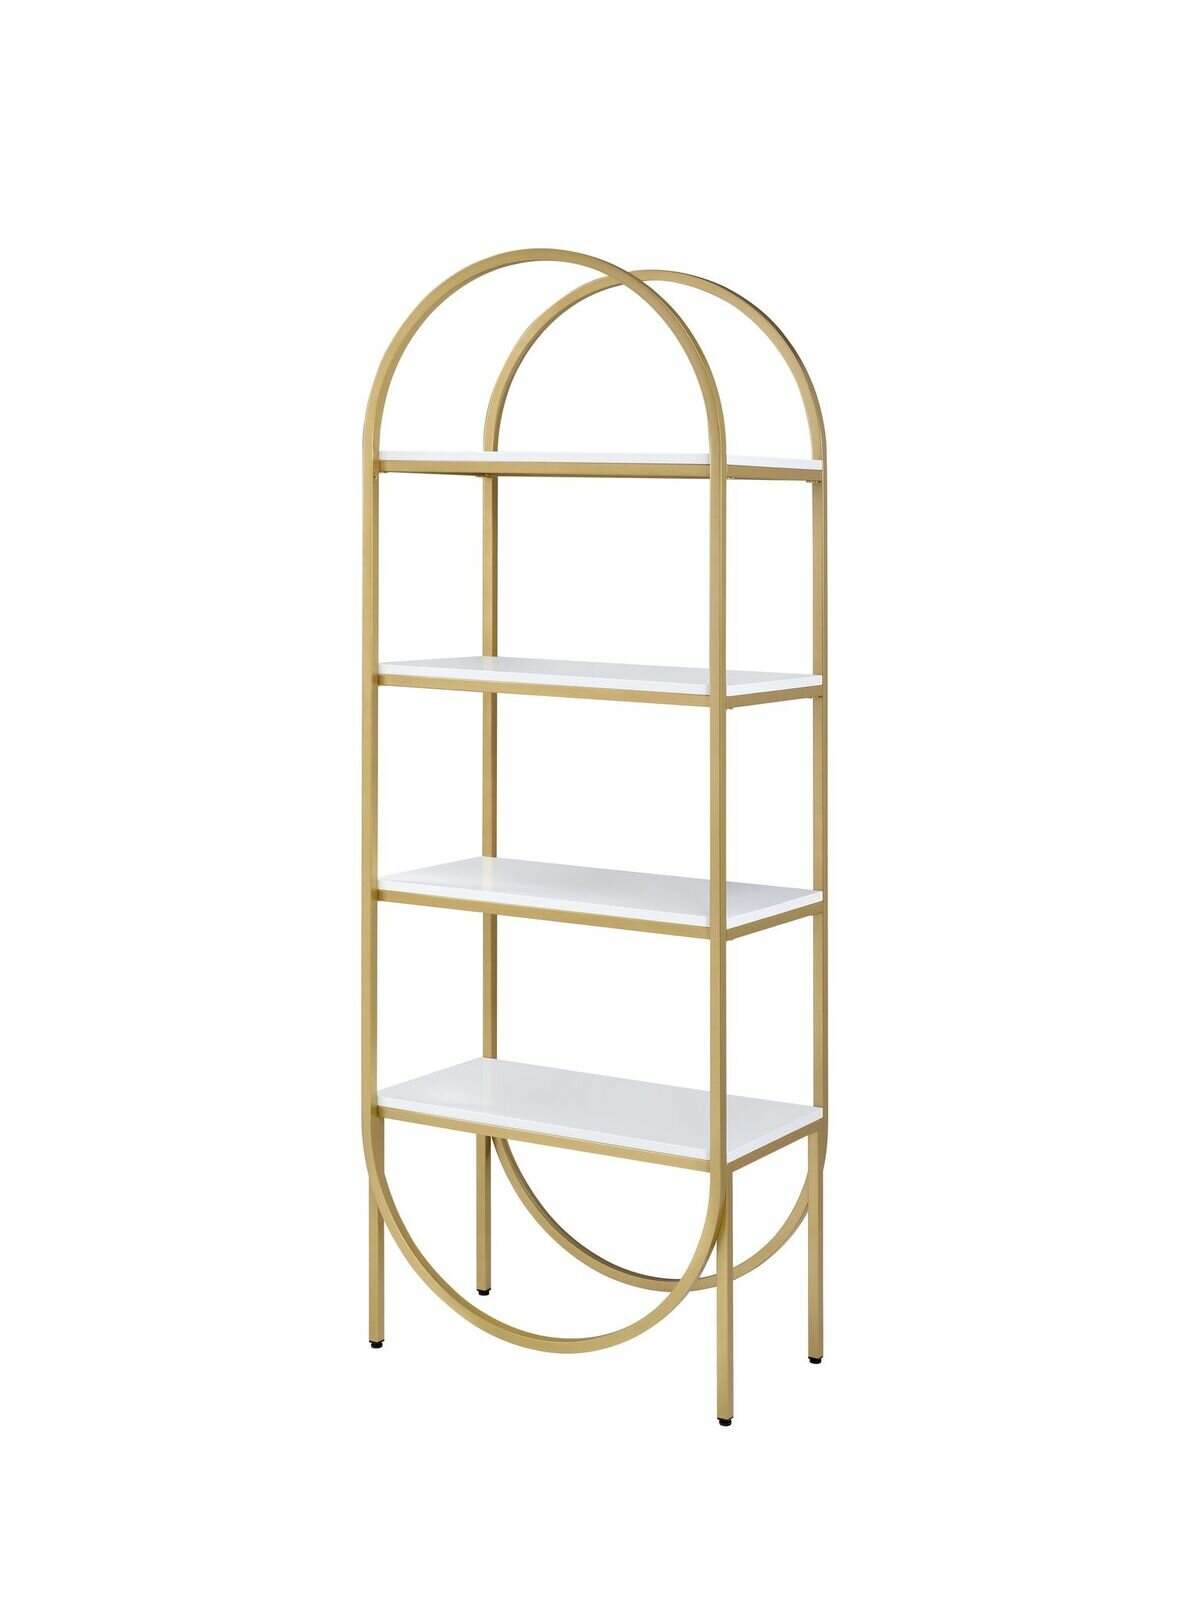 Everly Quinn Arched Metal Frame Wooden Bookshelf With 4 Open